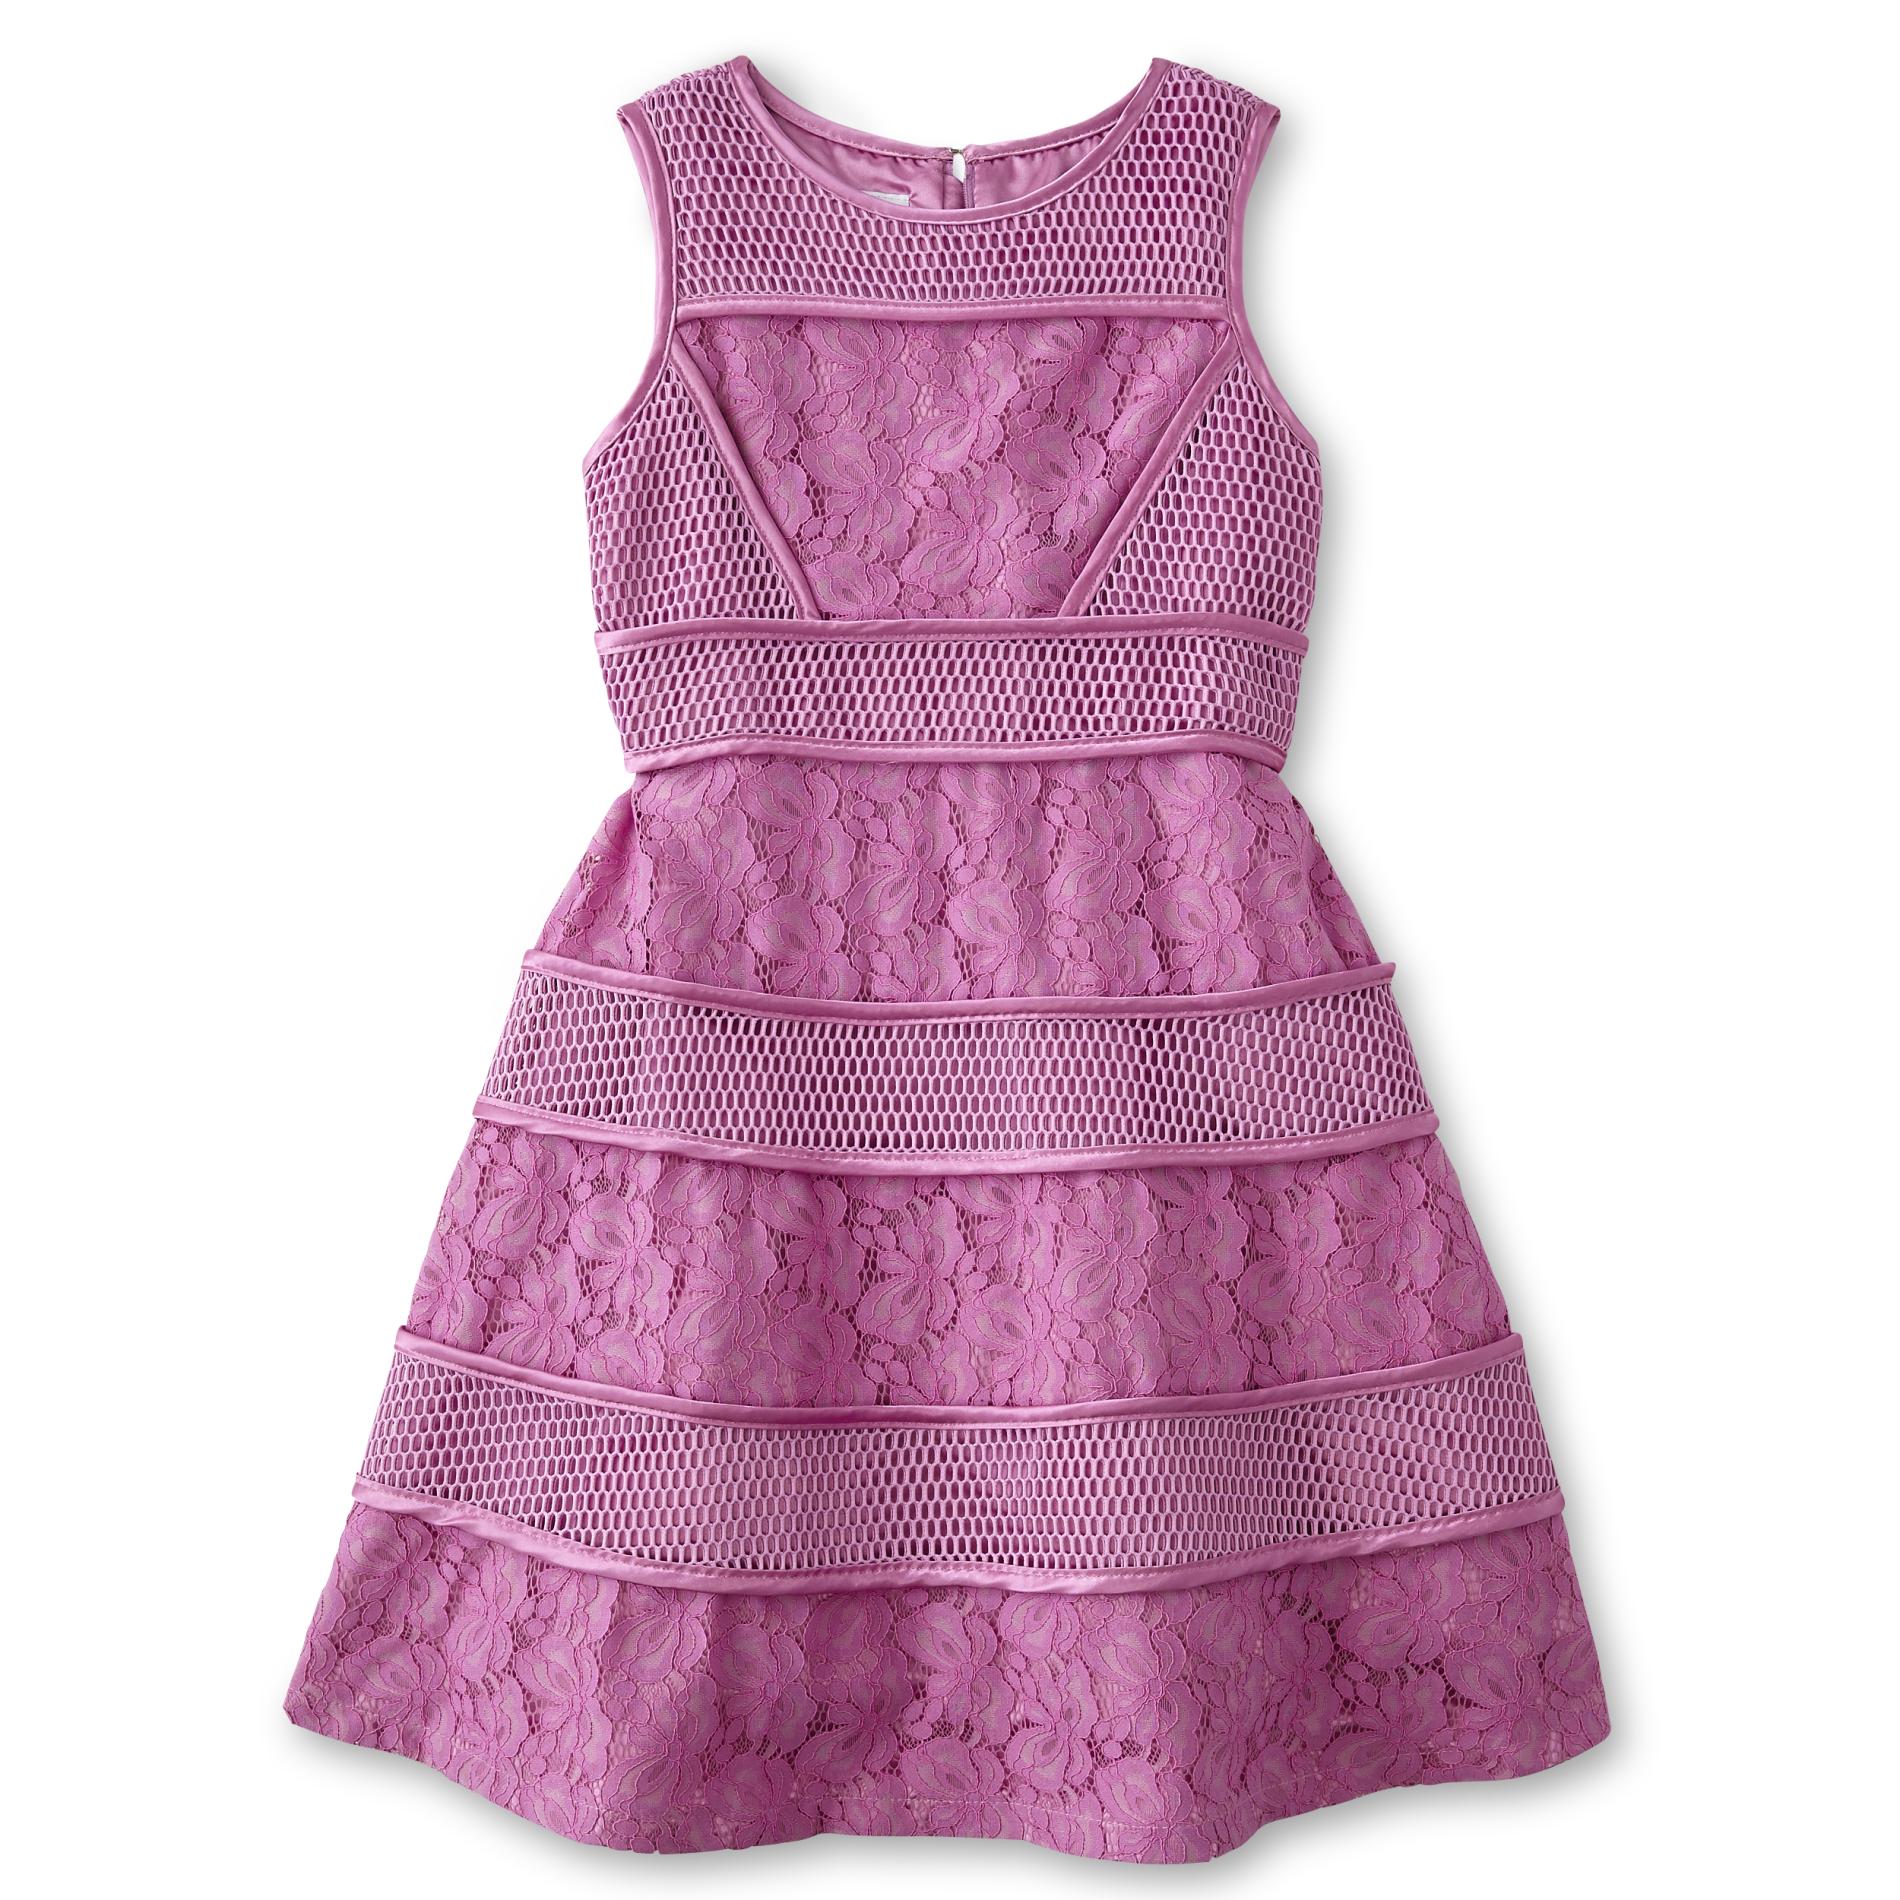 Special Editions Girls' Mixed Media Occasion Dress